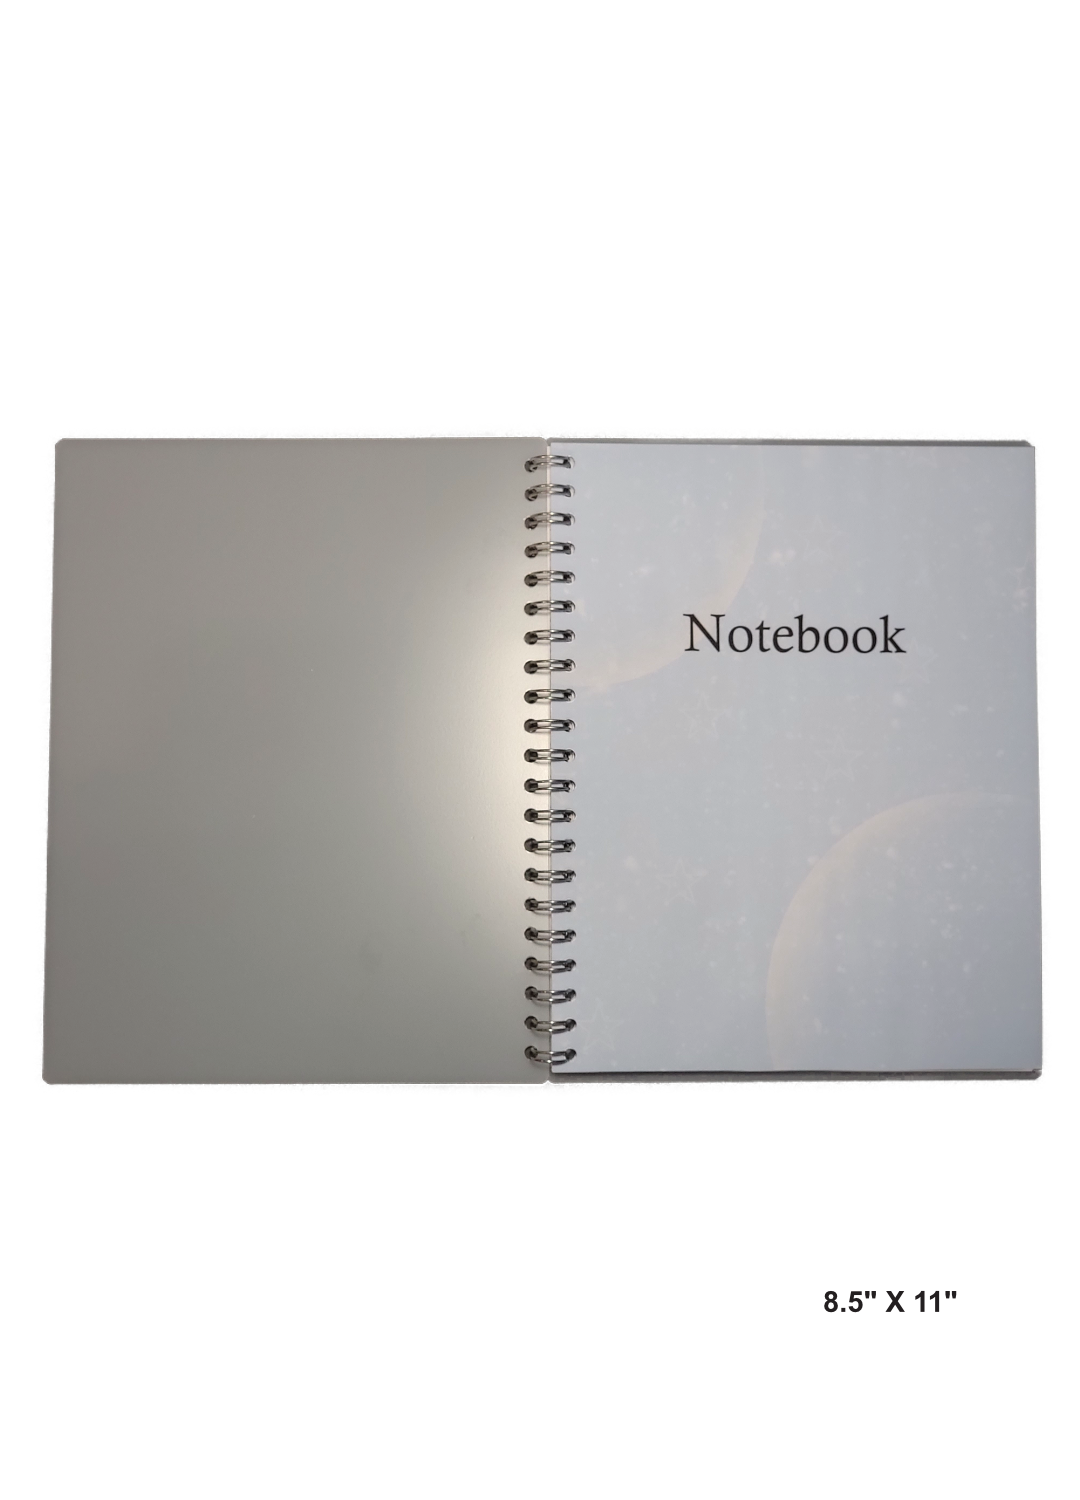 Image of hand-made 8.5" x 11" notebook with moons in two corners. The notebook's pages are lined for writing or journaling 